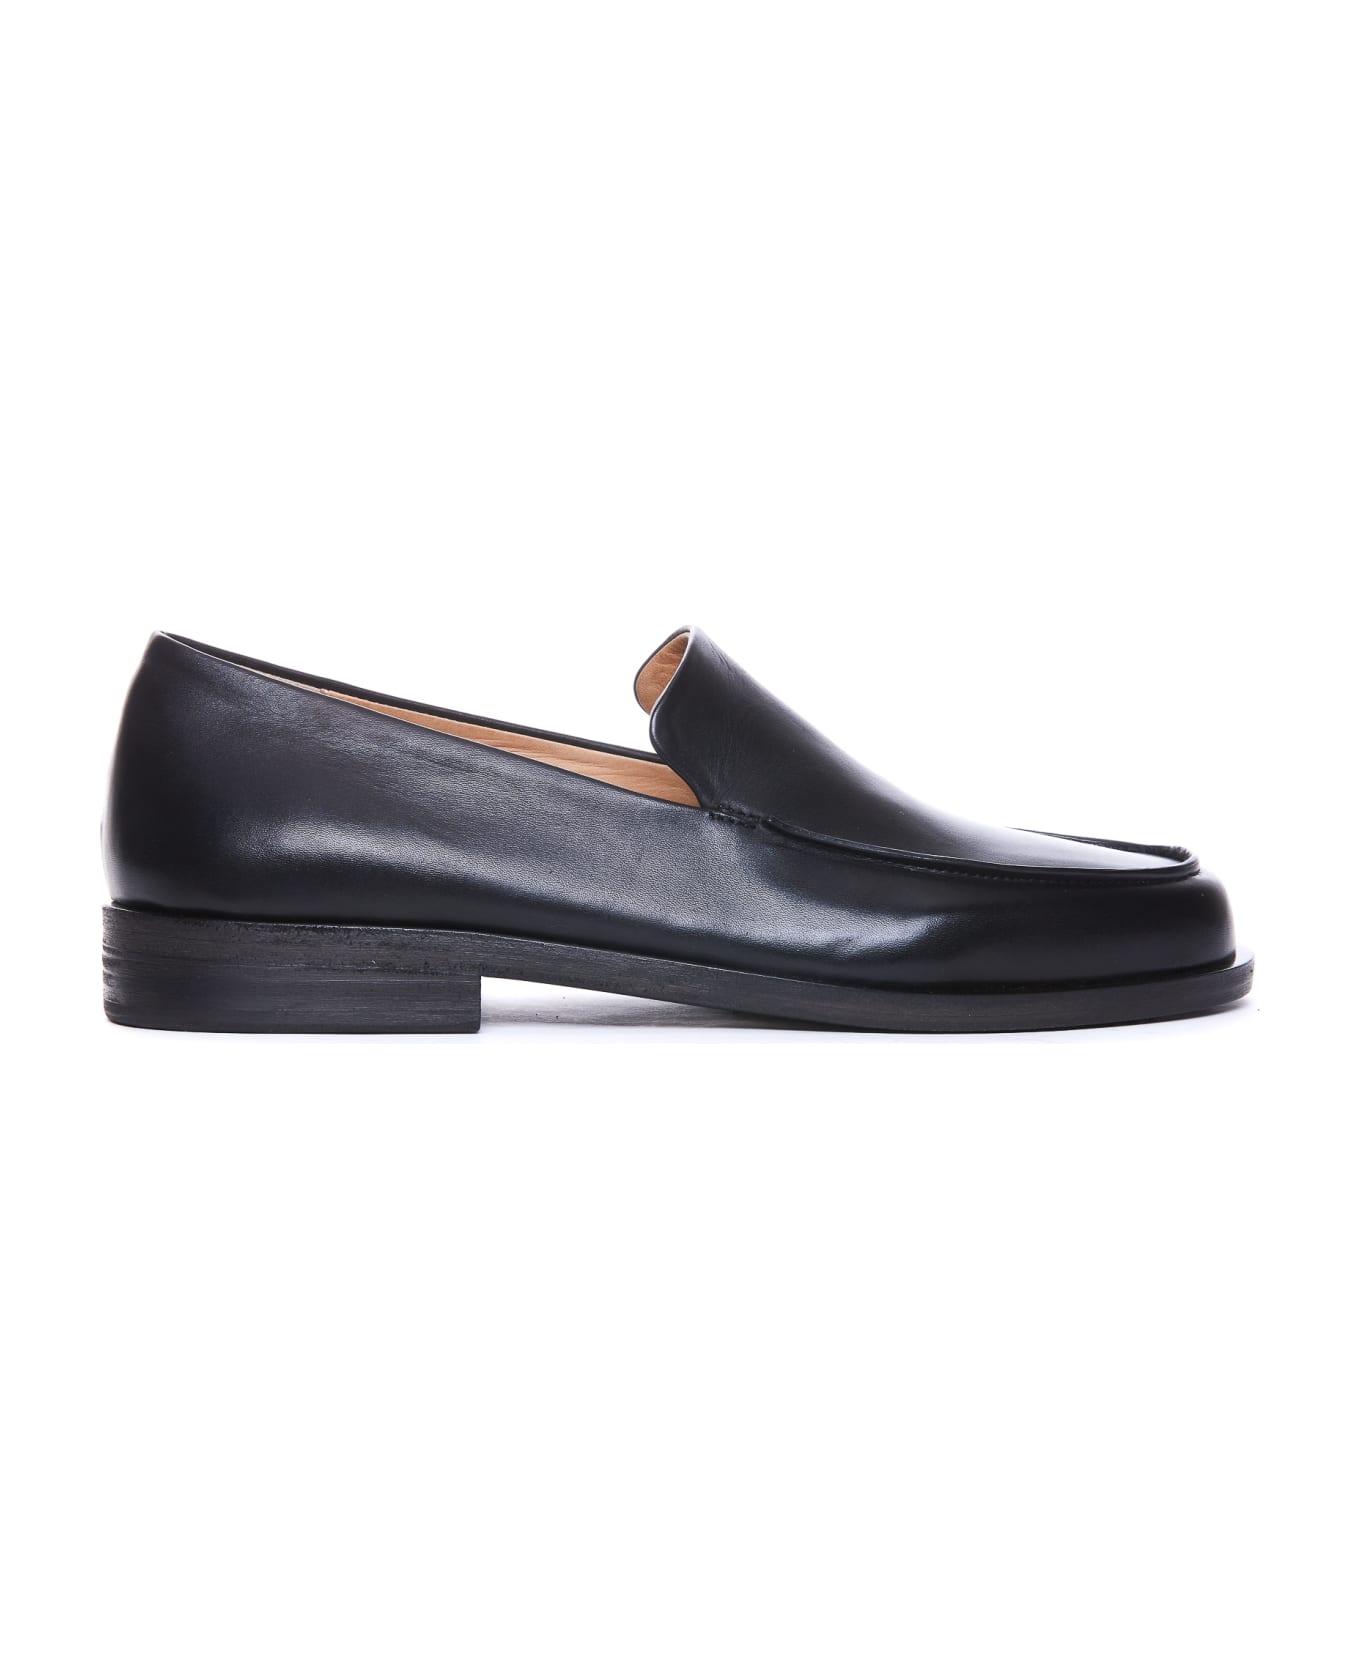 Marsell Loafers - Black